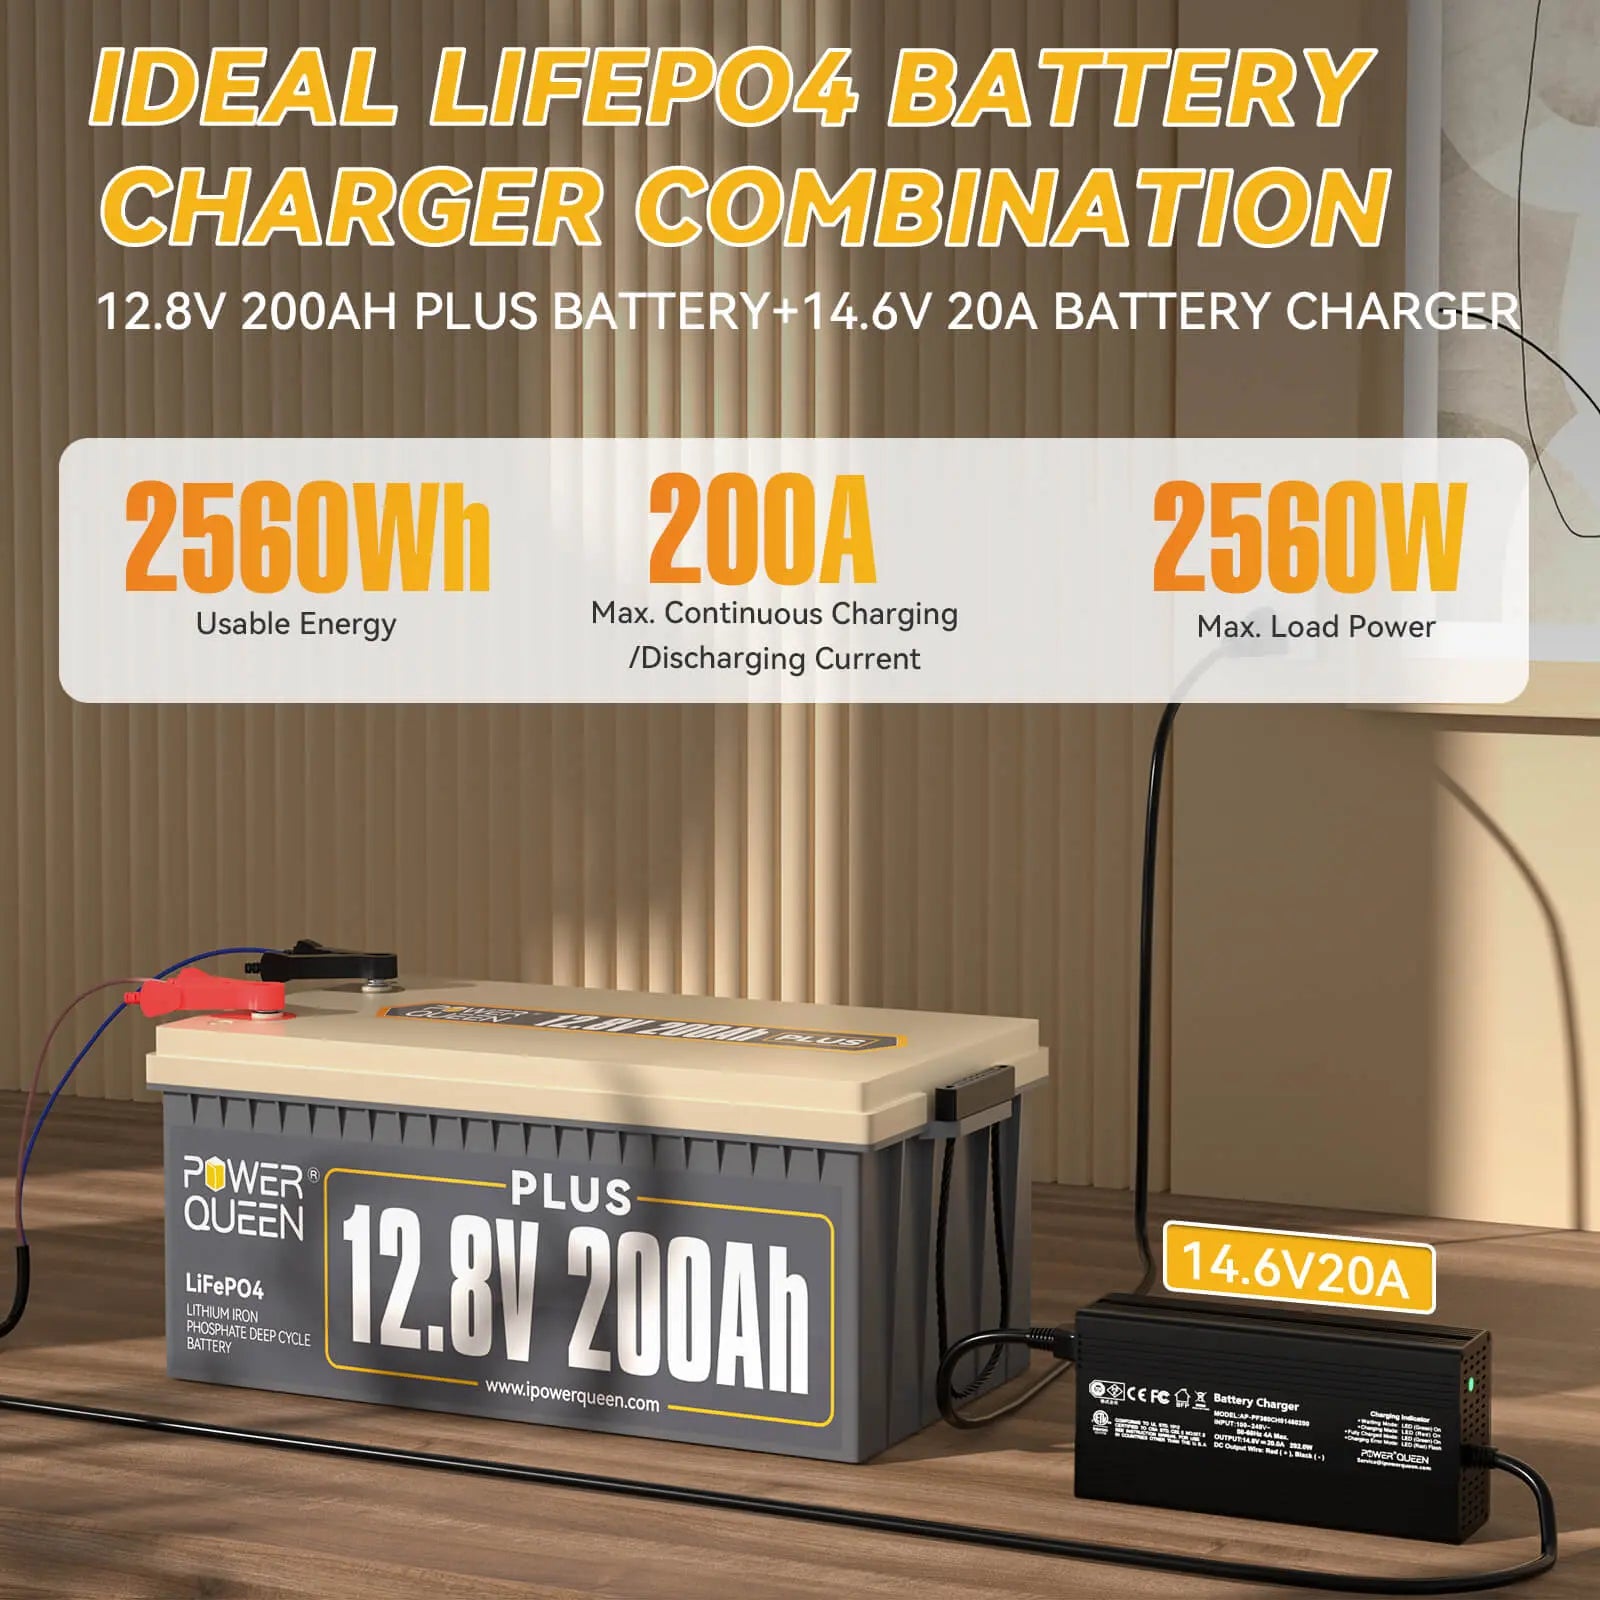 Power-Queen-12V-200Ah-Plus-LiFePO4-Battery-with-20A-LiFePO4-Battery-Charger-2560W-Max-Load